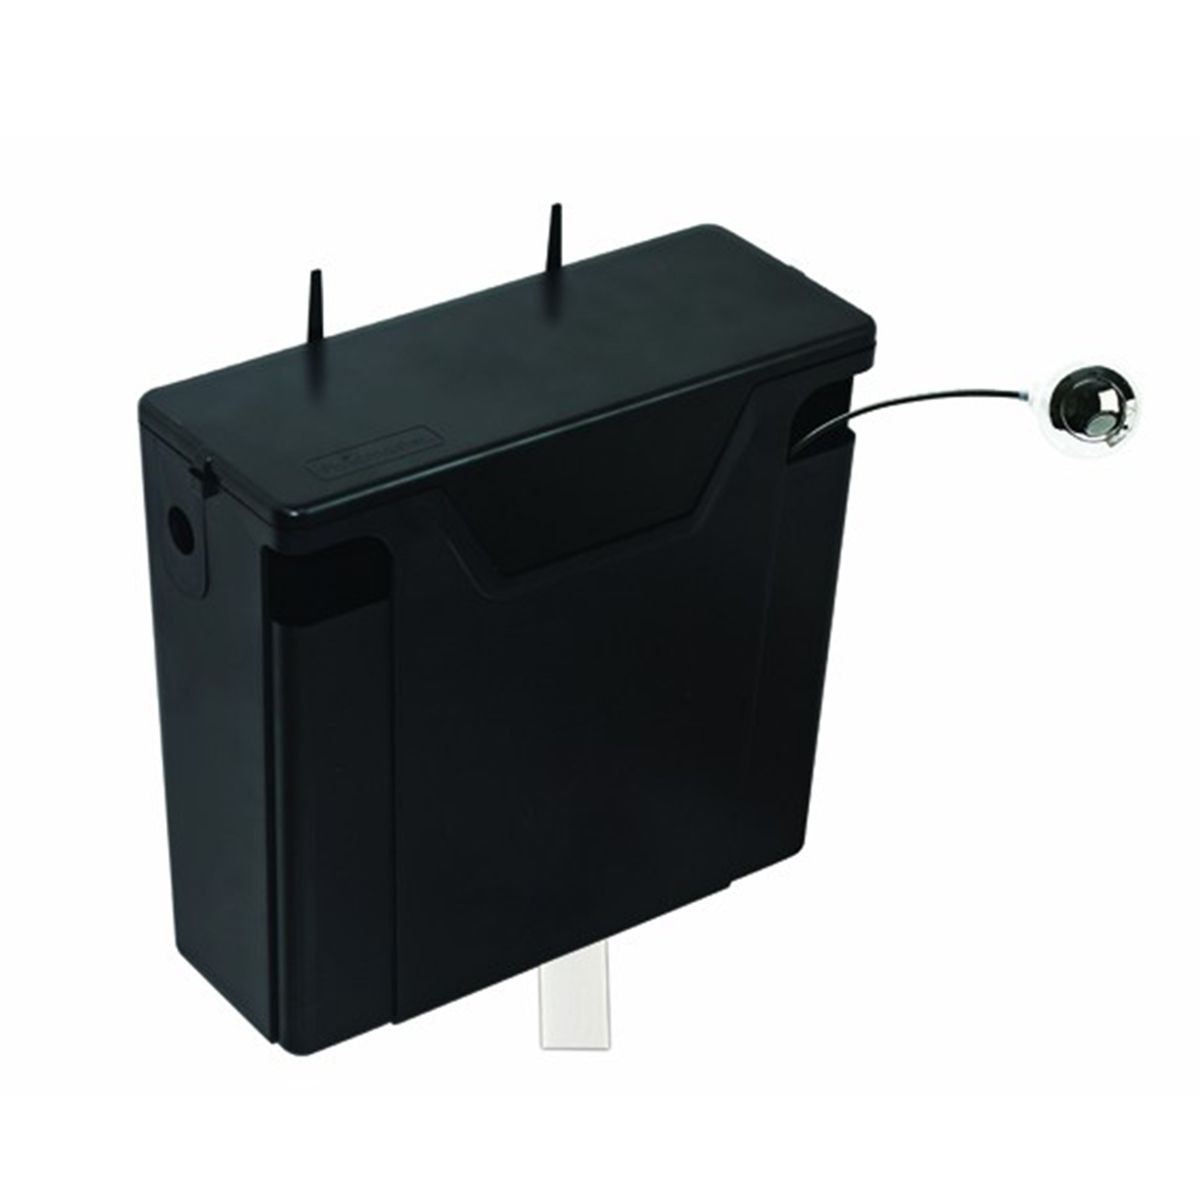 Keytec Front Access Concealed Cistern